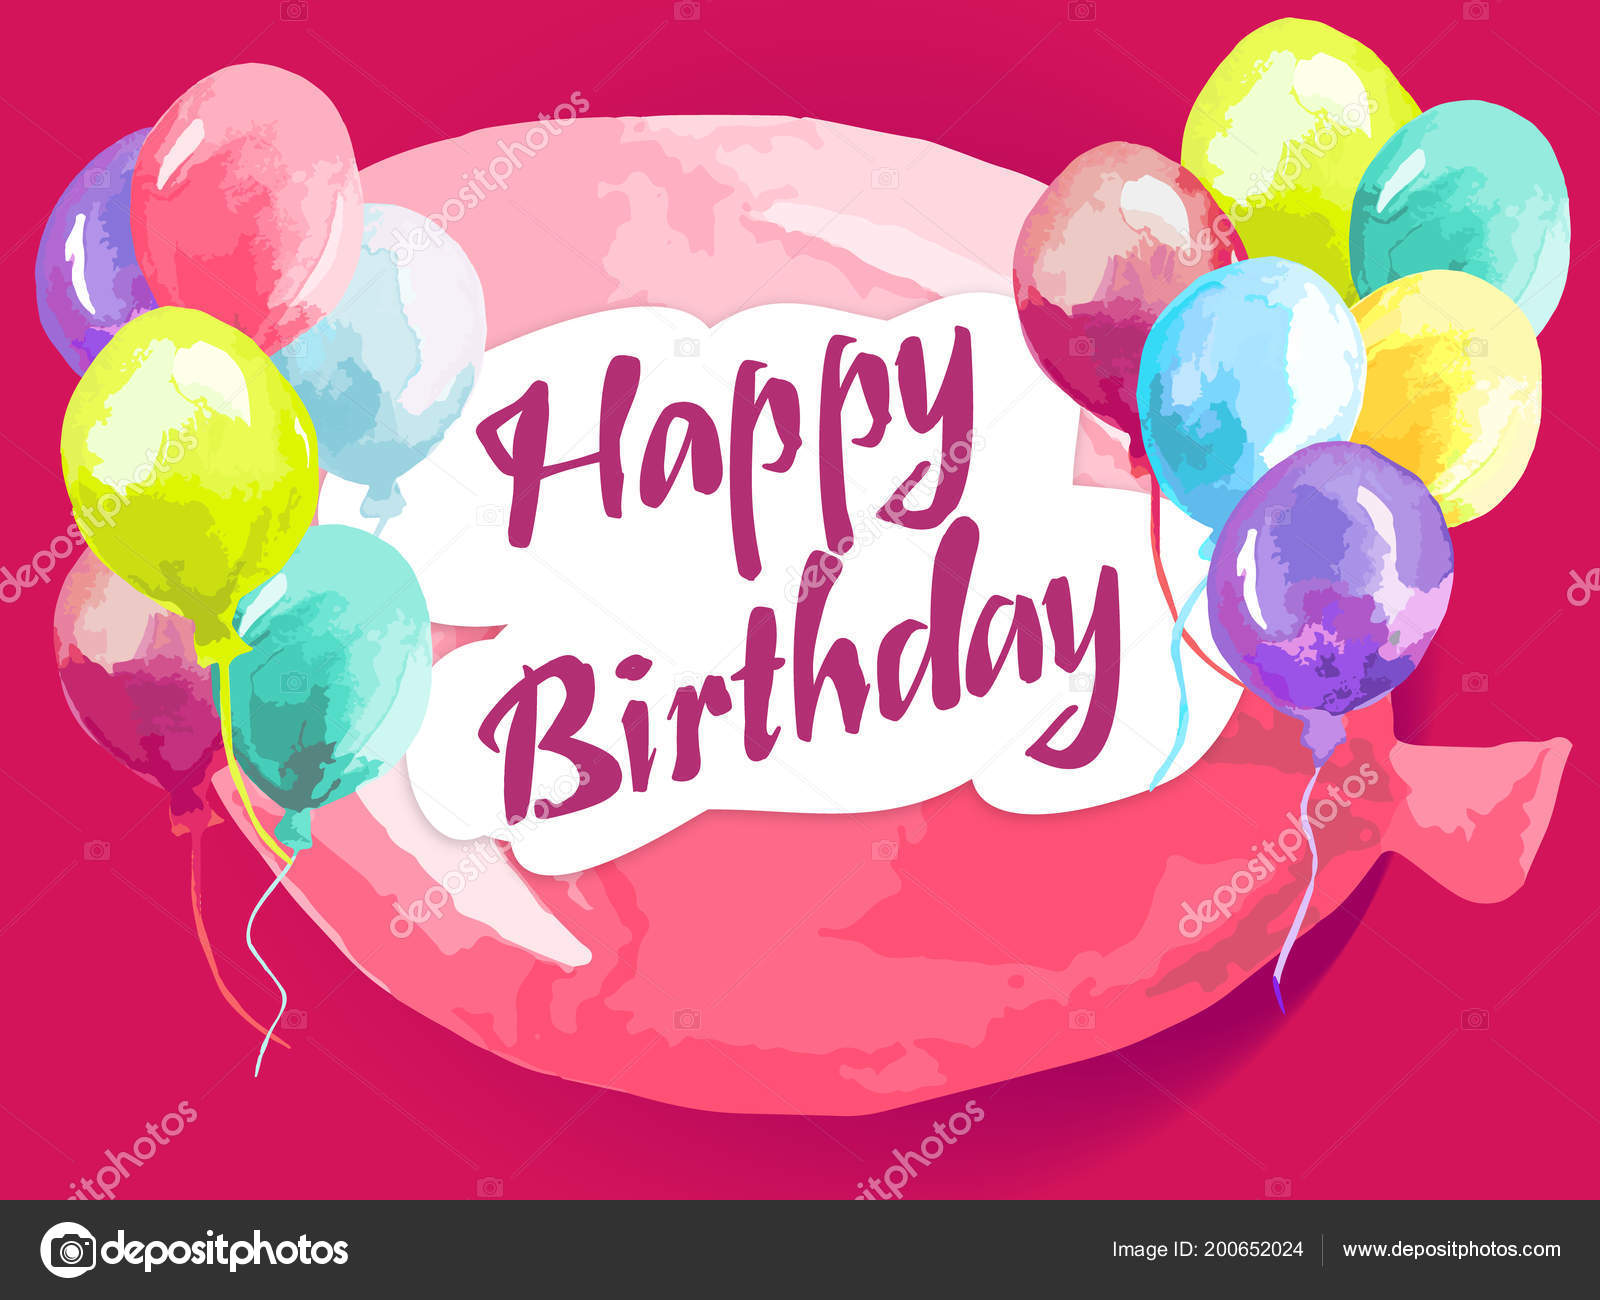 happy birthday wallpaper,balloon,text,party supply,font,pink